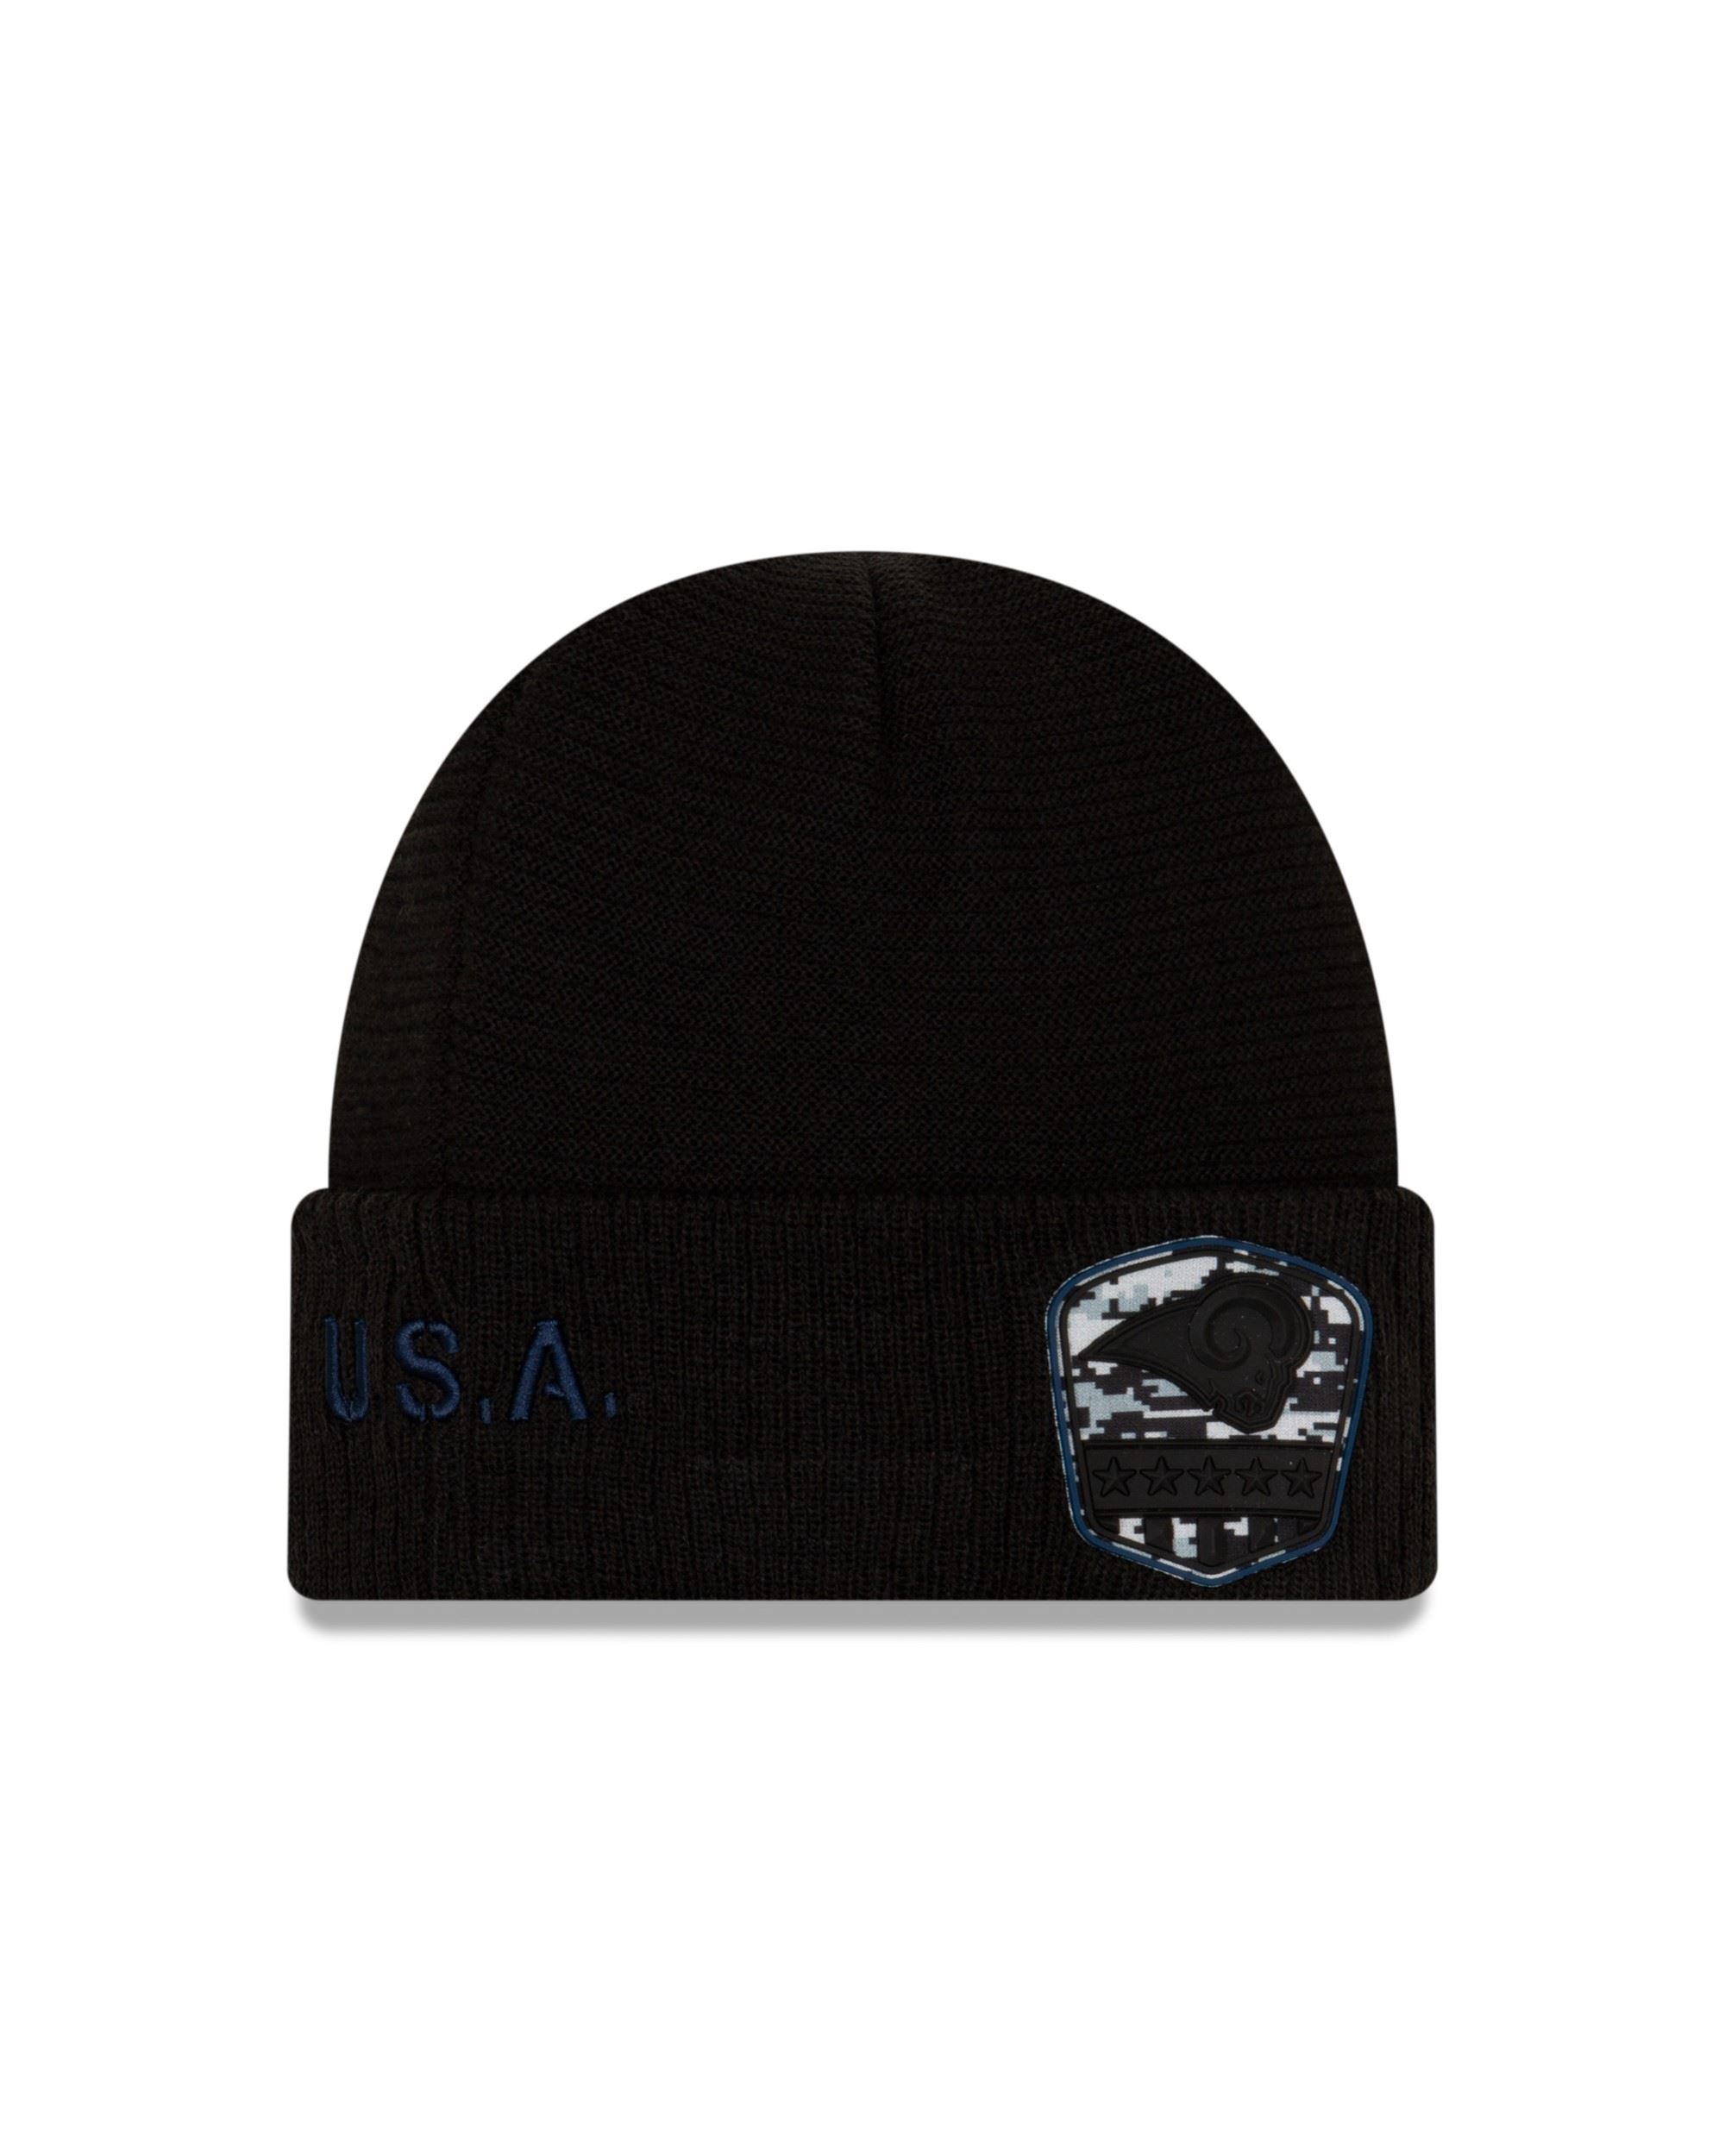 Los Angeles Rams NFL On Field 2019 Salute to Service Beanie New Era